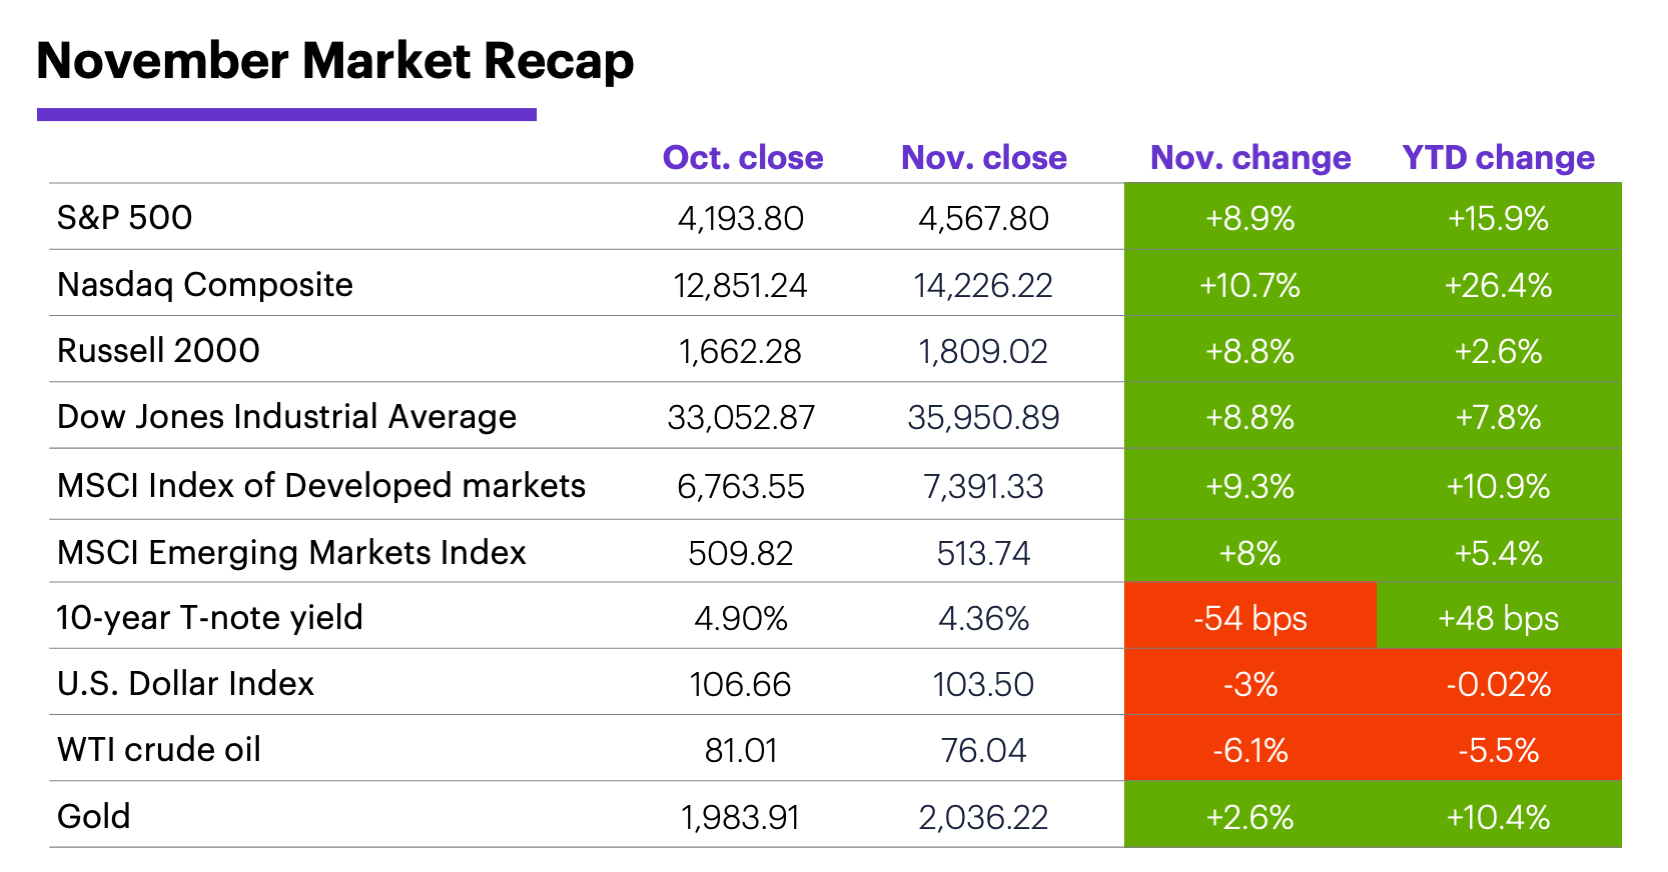 November Market Recap: Monthly and year-to-date returns